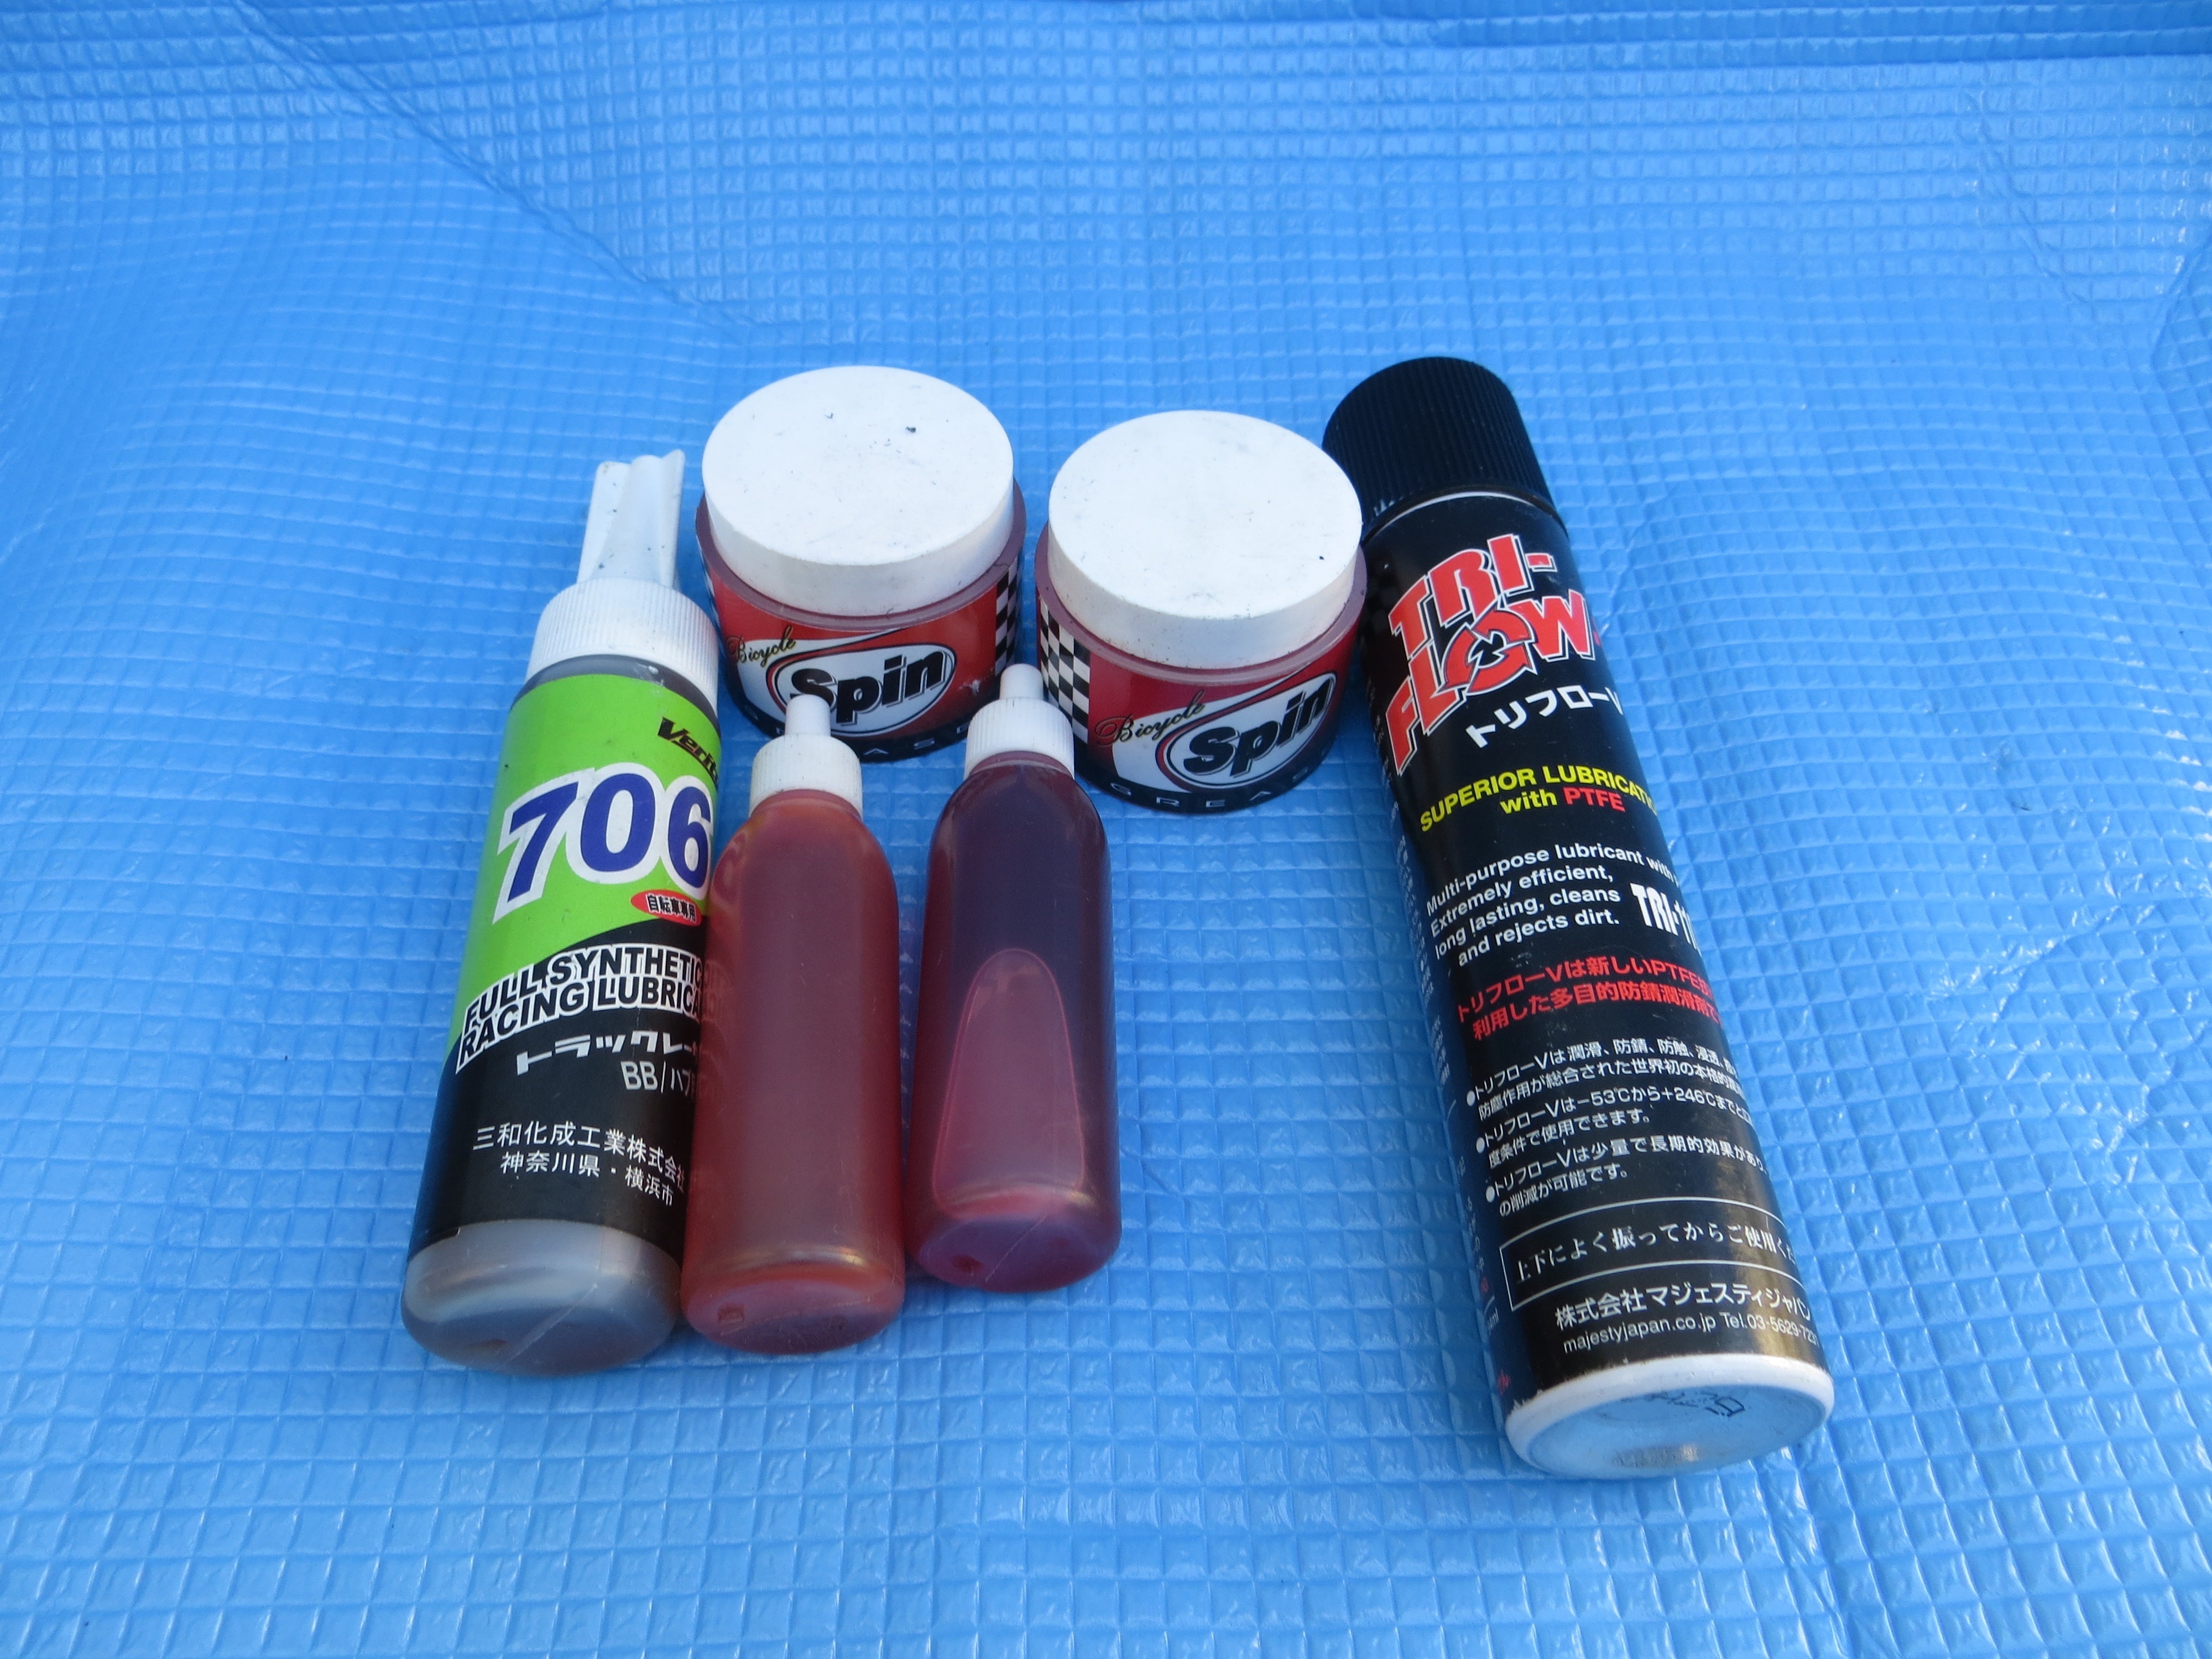 Used Assorted Professional Chain/ Hub Grease Set 230g